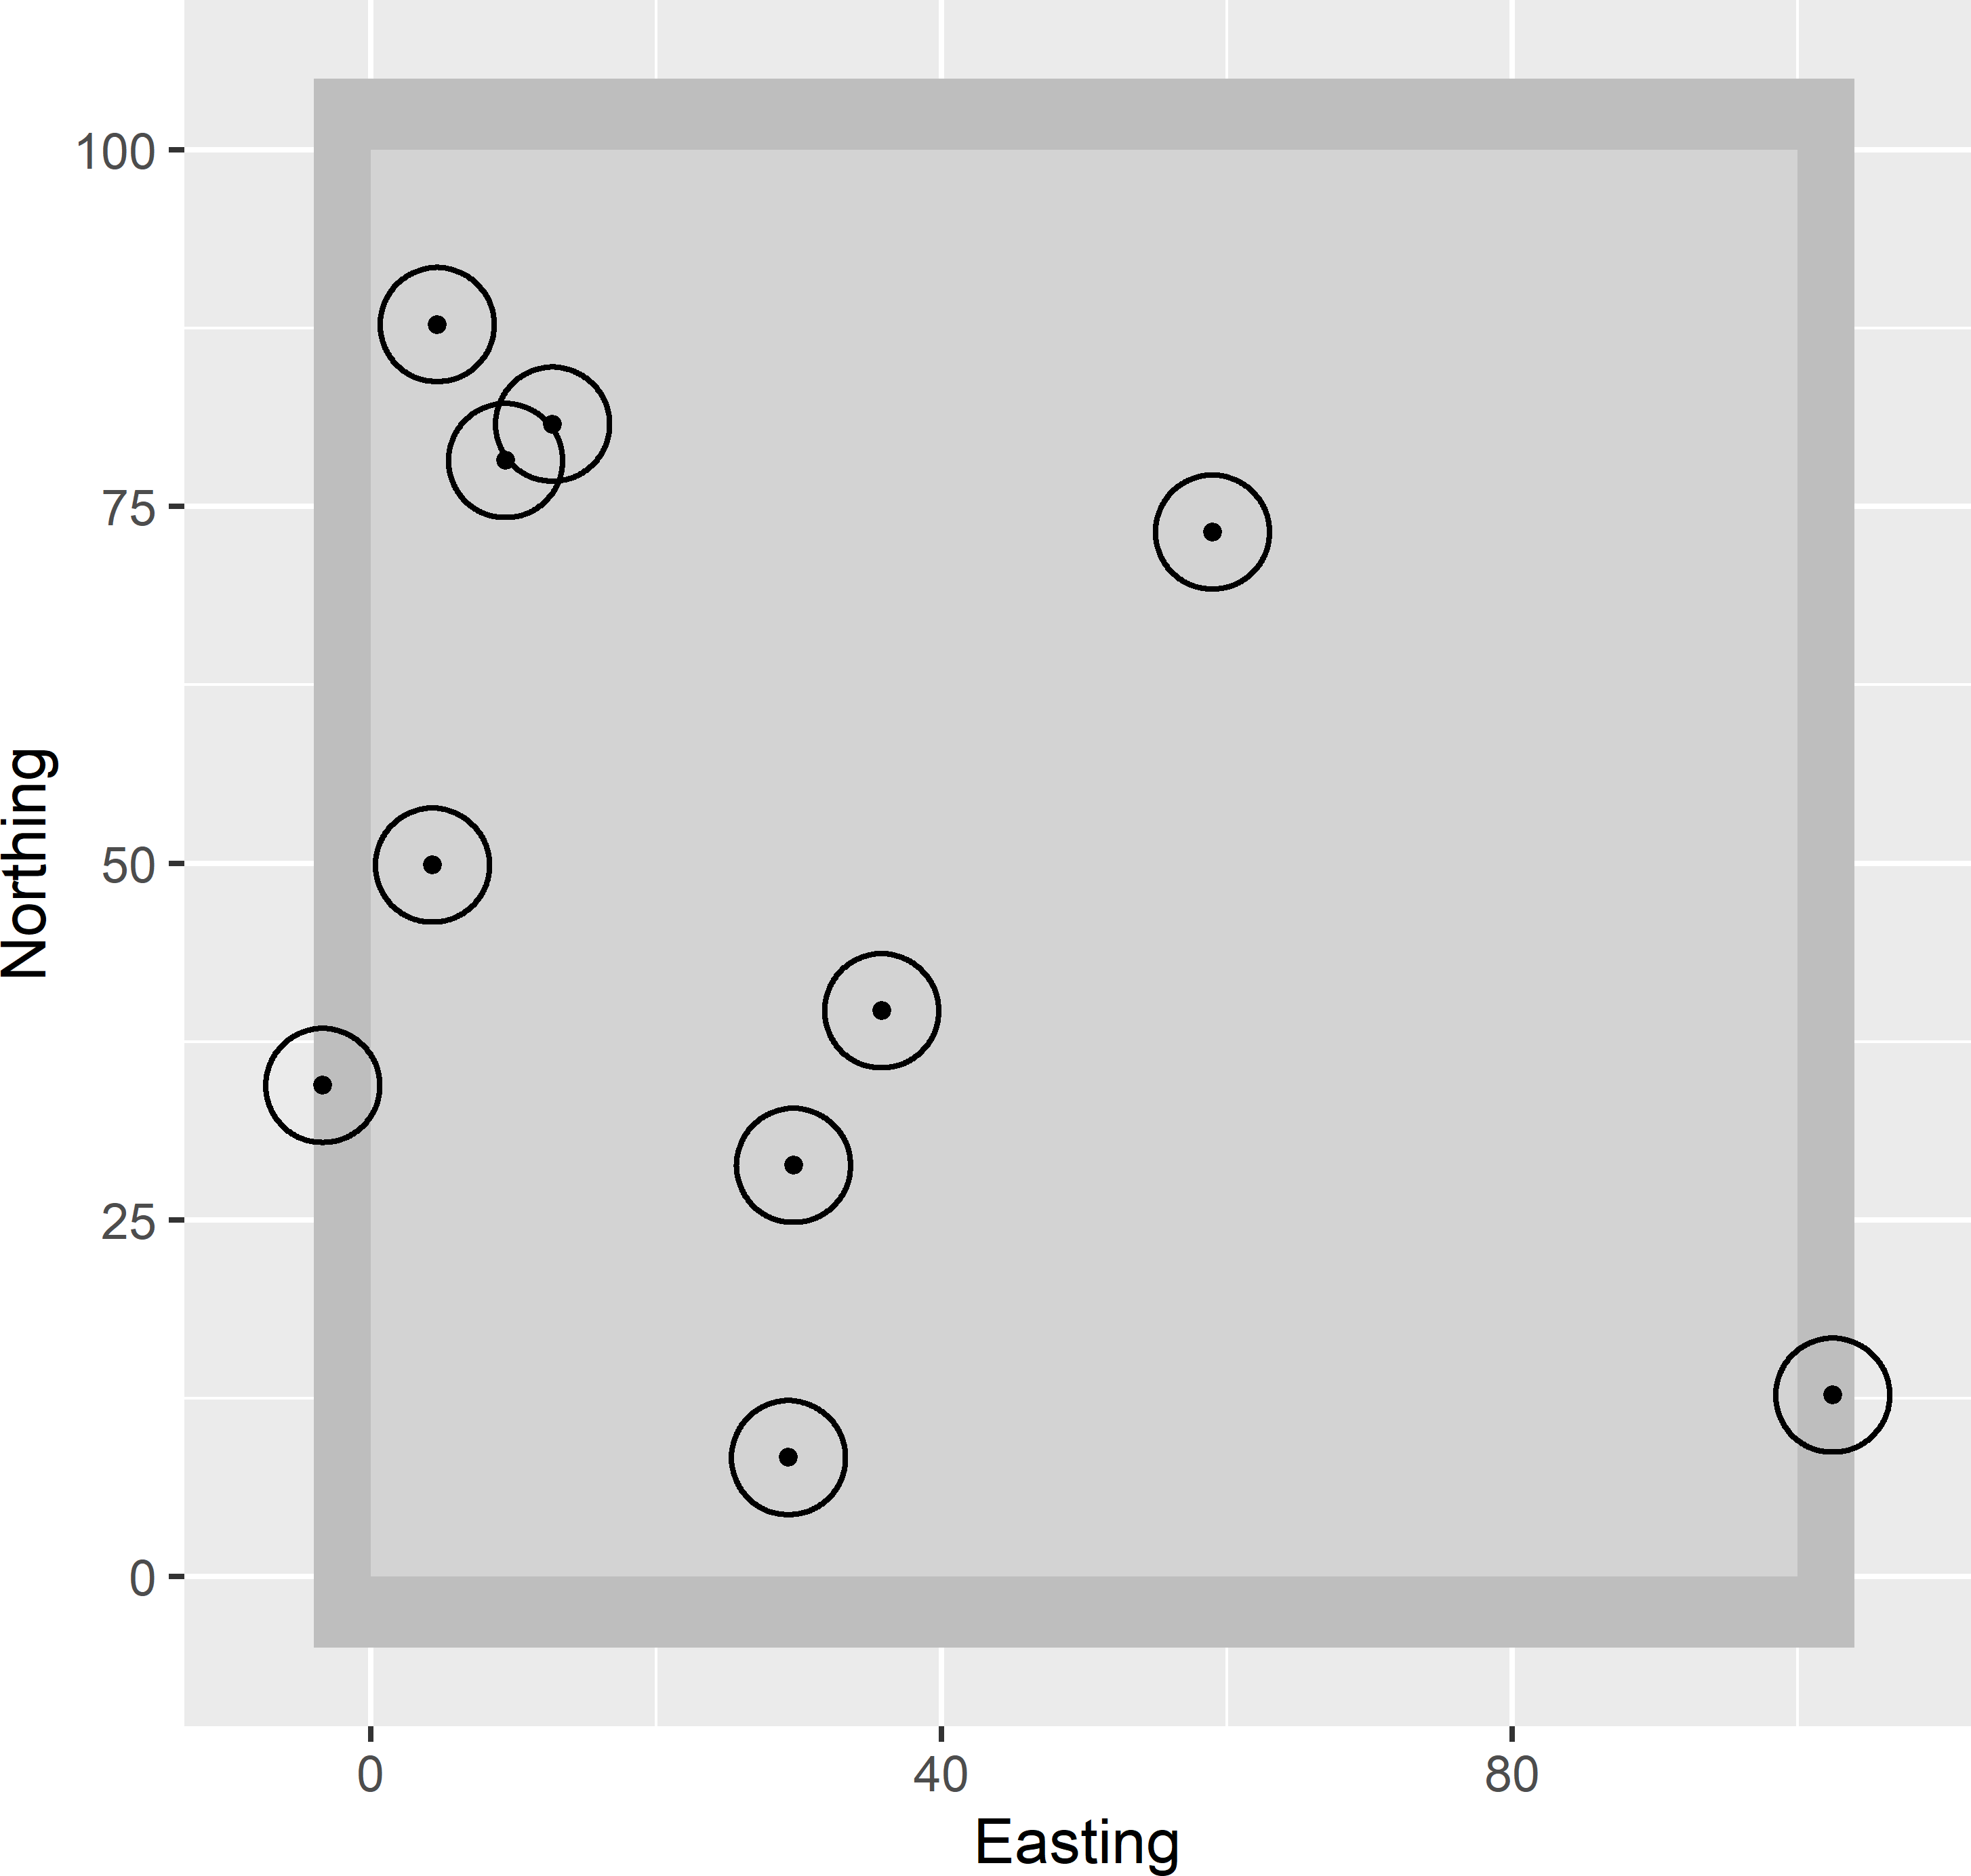 Simple random sample of ten floating circular plots from a square.